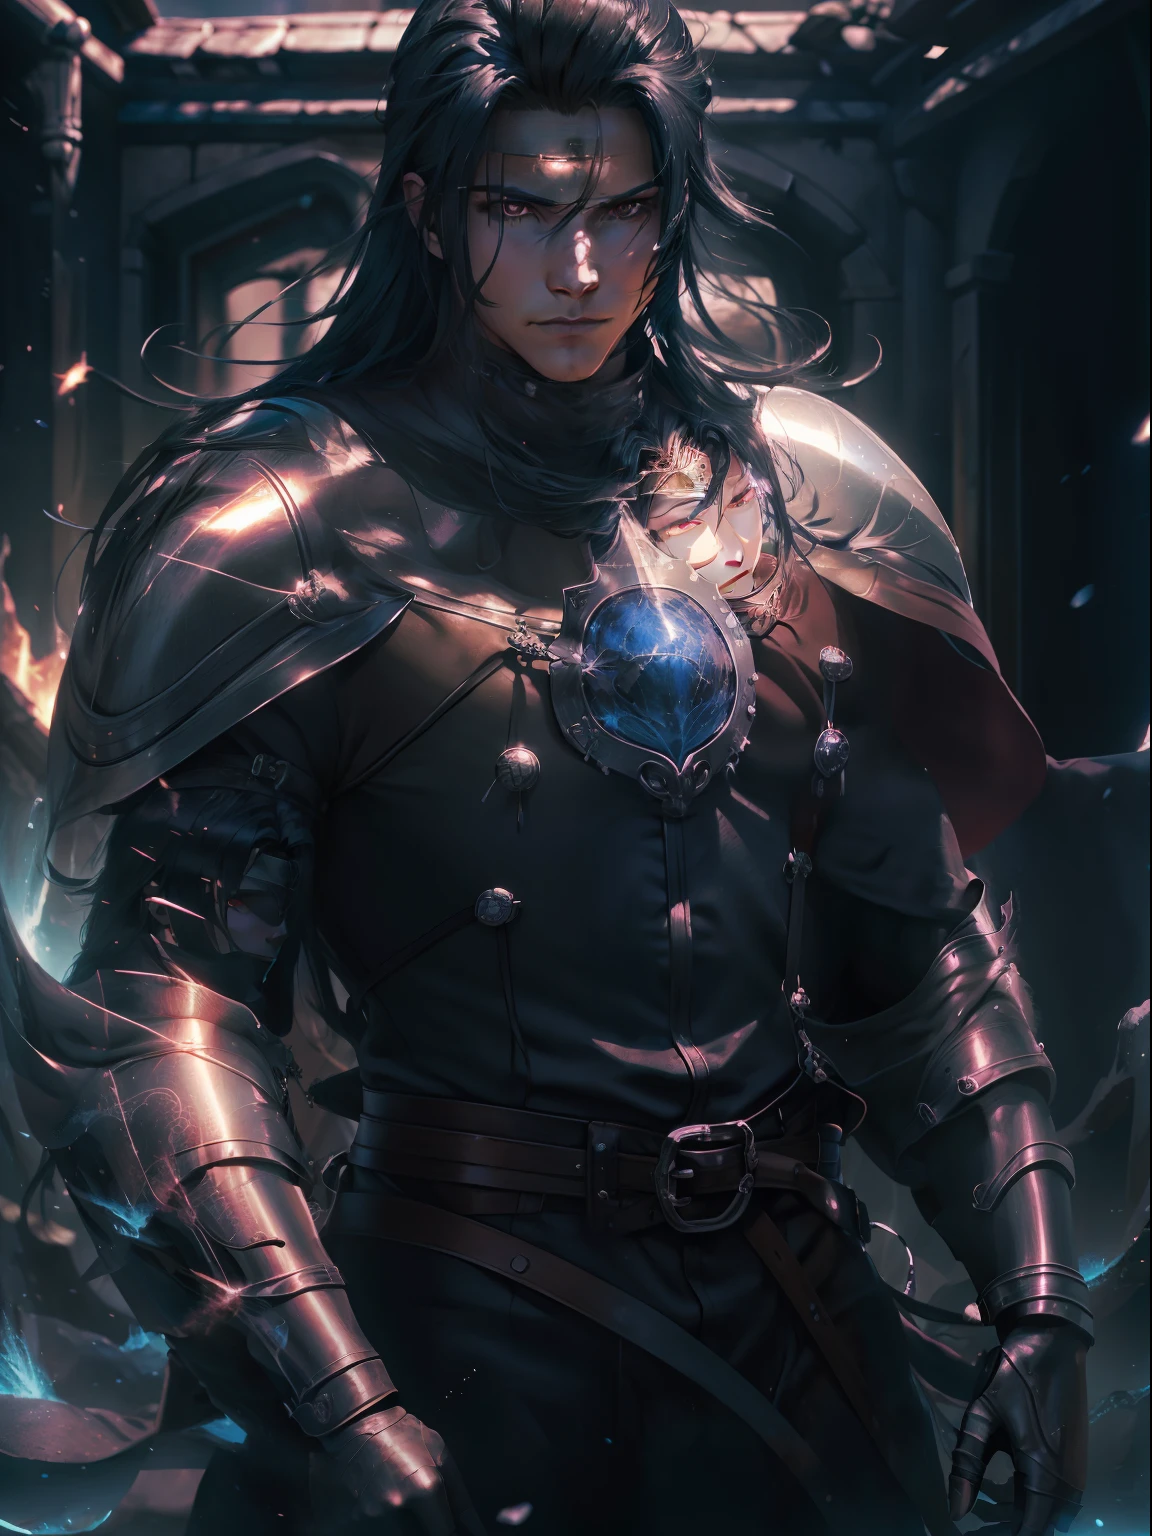 sem pelos faciais, Round face, square jawline, blackquality hair, long  hair, eye reflection, glare eyes, Eyes red, smile sitrq, golden armour, Knights of the Zodiac Style, Golden knight, arm shield, Round Shield, heroic posture, conceptual artwork, アニメ, Estilo アニメ, Cinematic lighting, motion blur, symetry, cowboy shot, F/1.2, 35 mm, hasselblad, High details, high qualiy, texturized skin, best quality, 8K